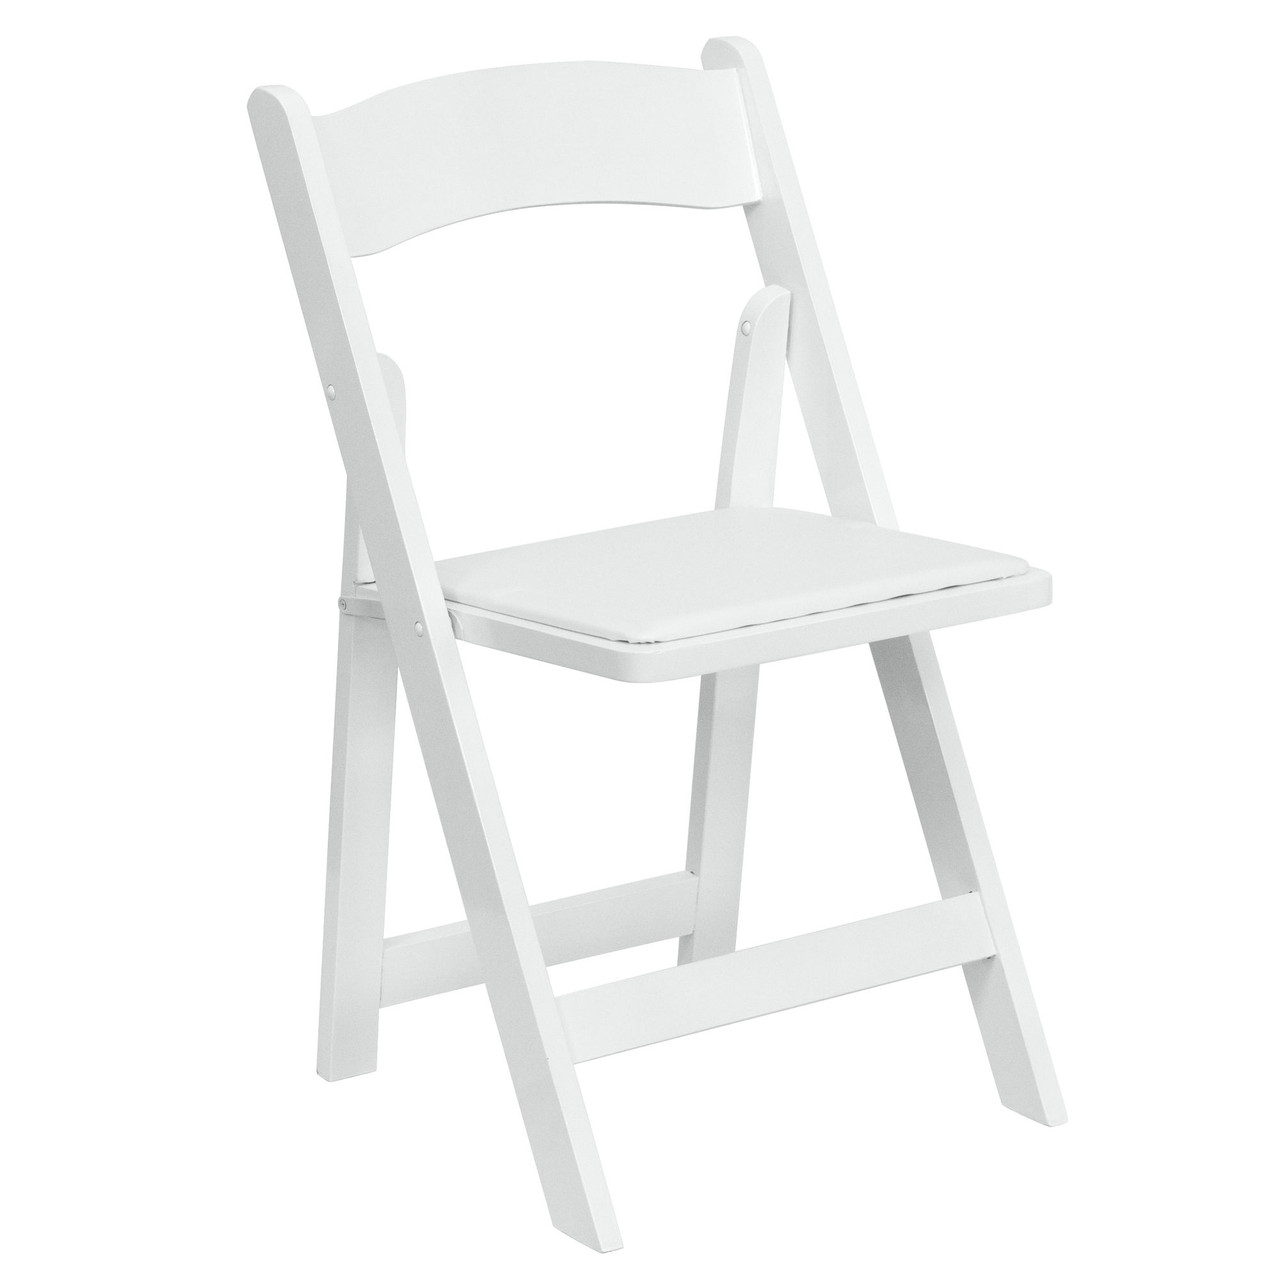 White Wood Folding Wedding Chair Padded Wedding Chairs For Sale